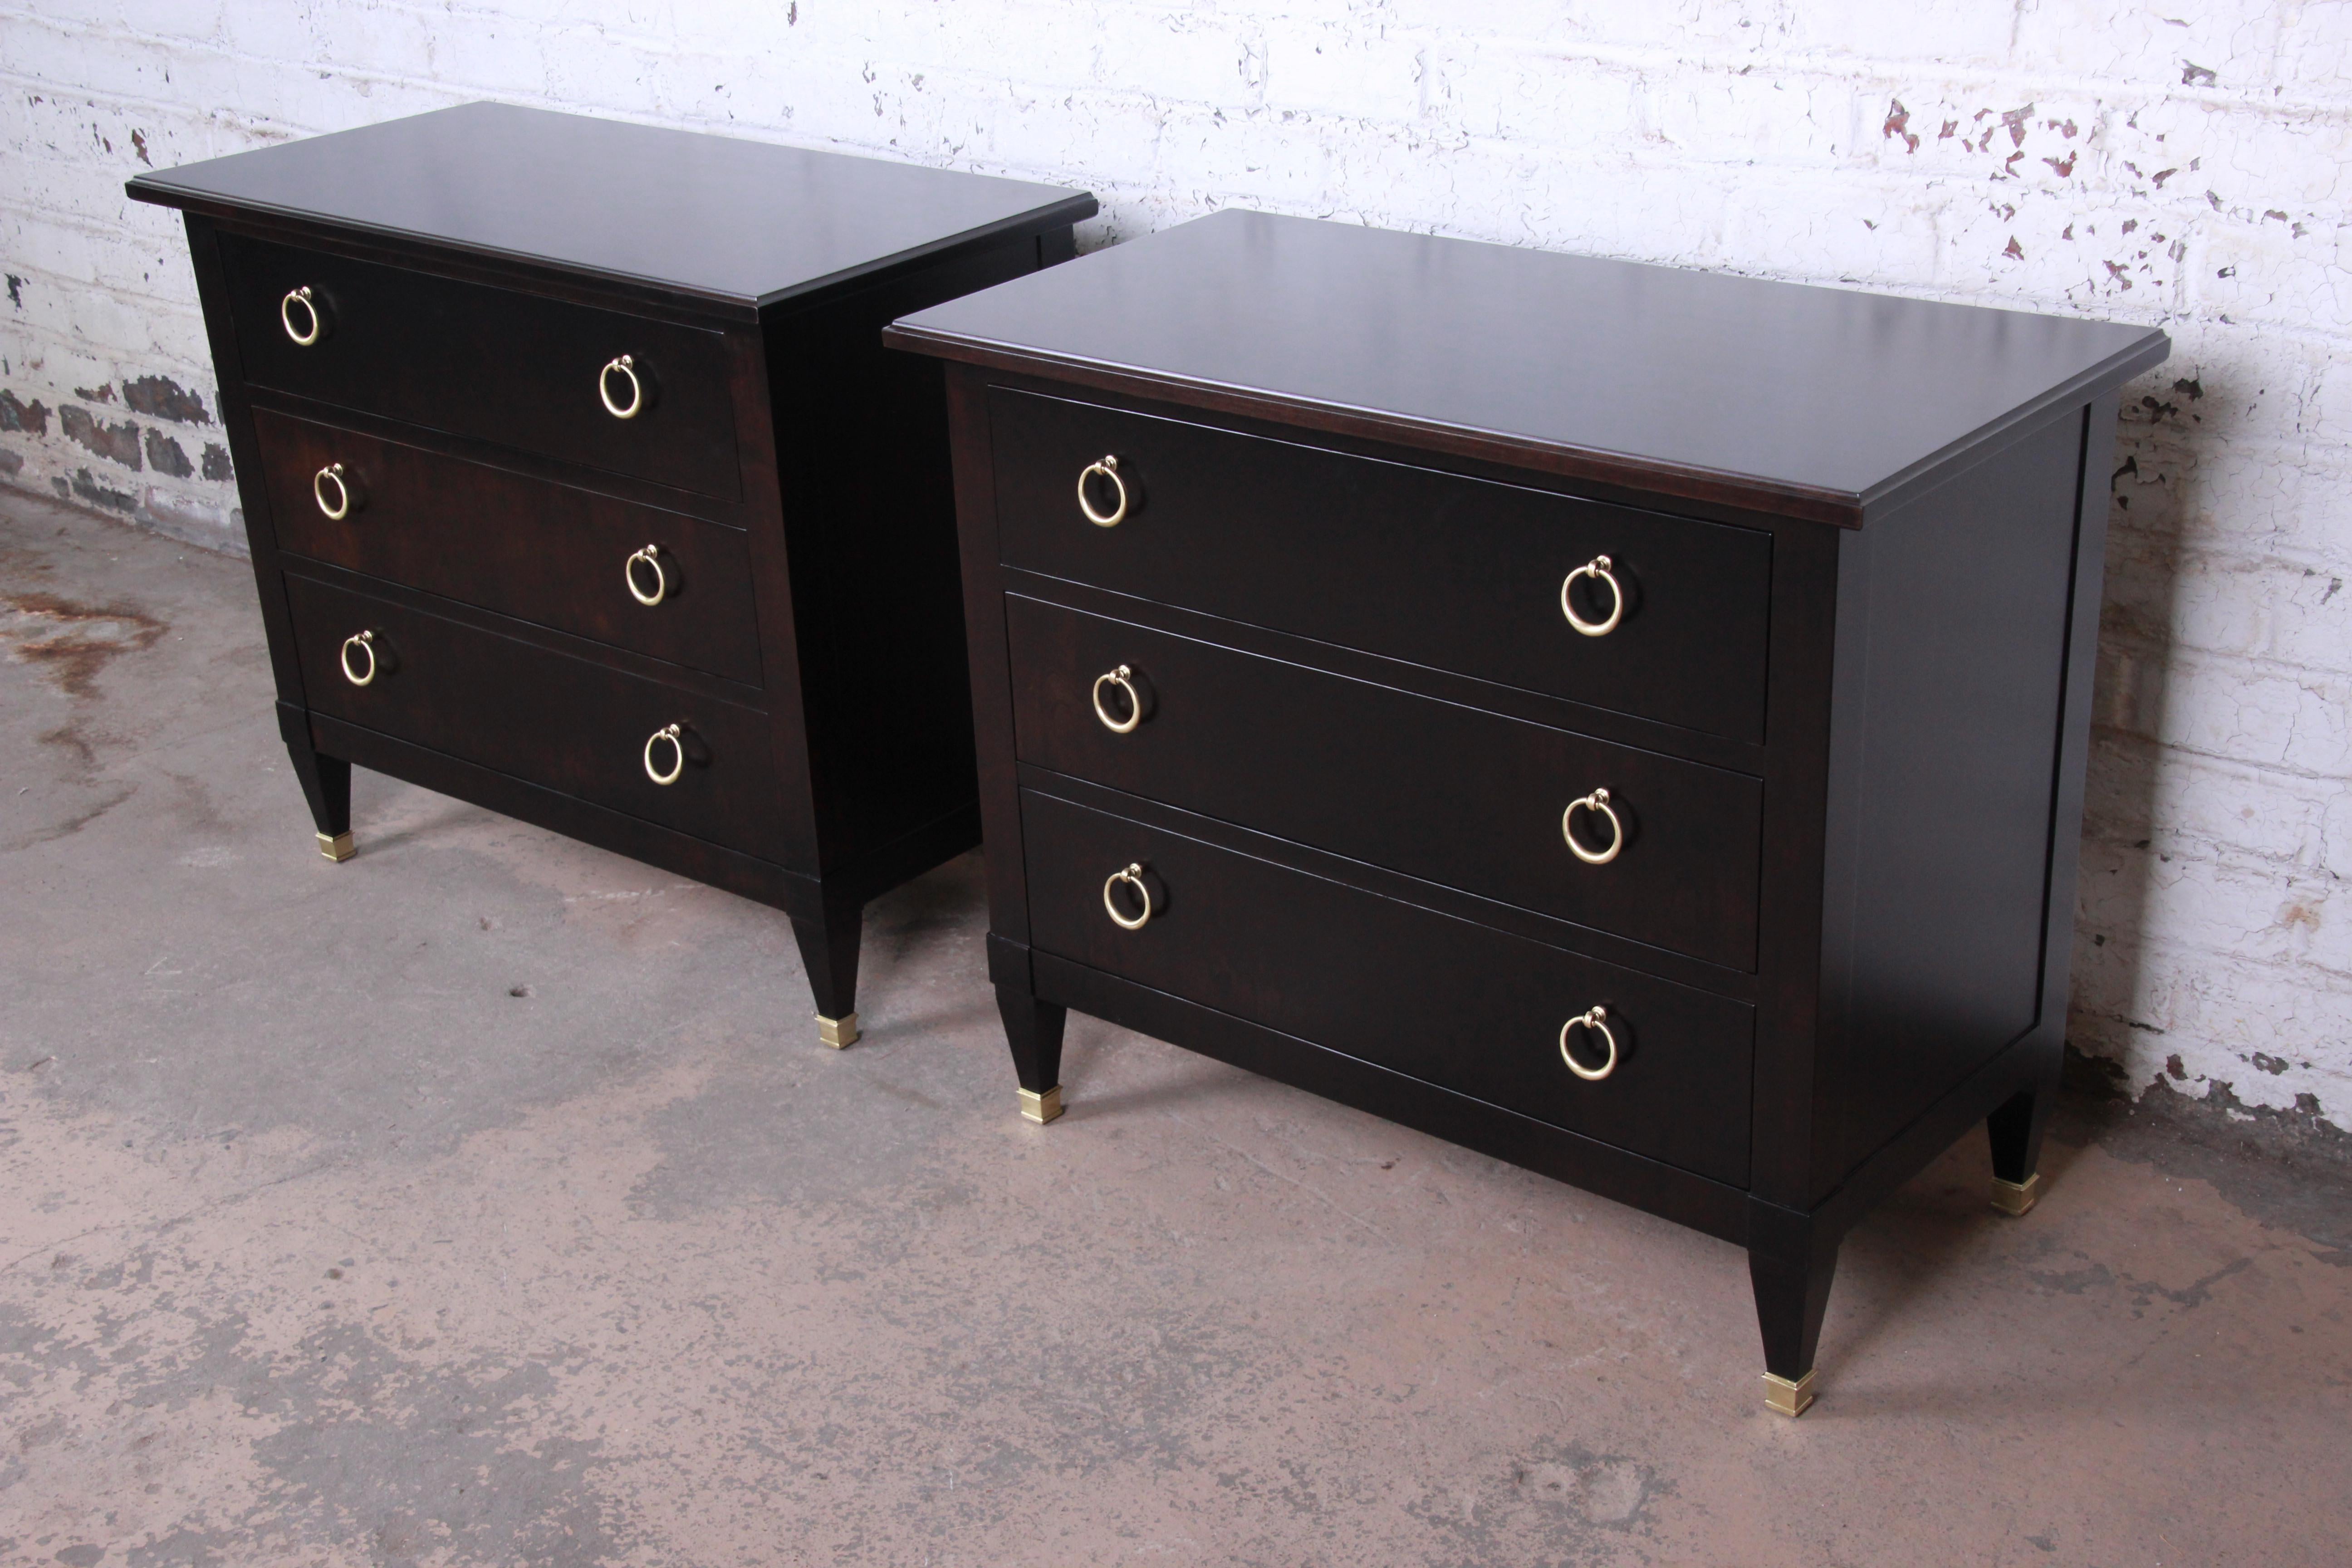 American Baker Furniture Hollywood Regency Ebonized Nightstands or Bachelor Chests, Pair